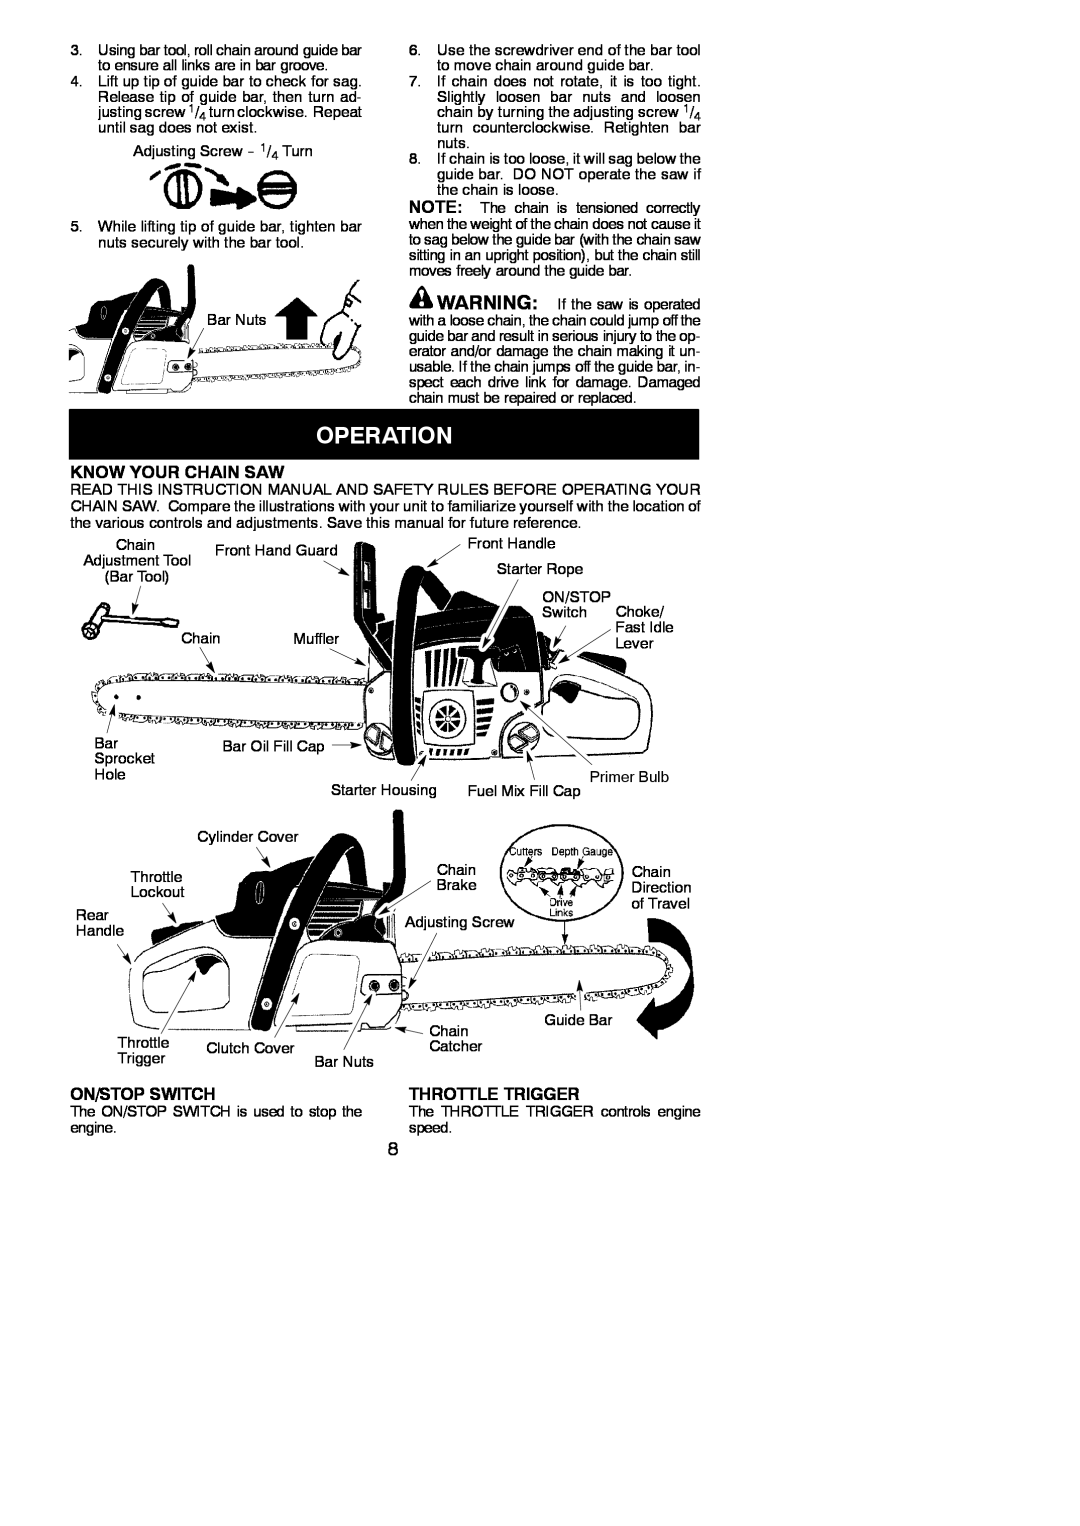 Poulan 545186804 instruction manual Operation, Know Your Chain Saw, On/Stop Switch, Throttle Trigger 